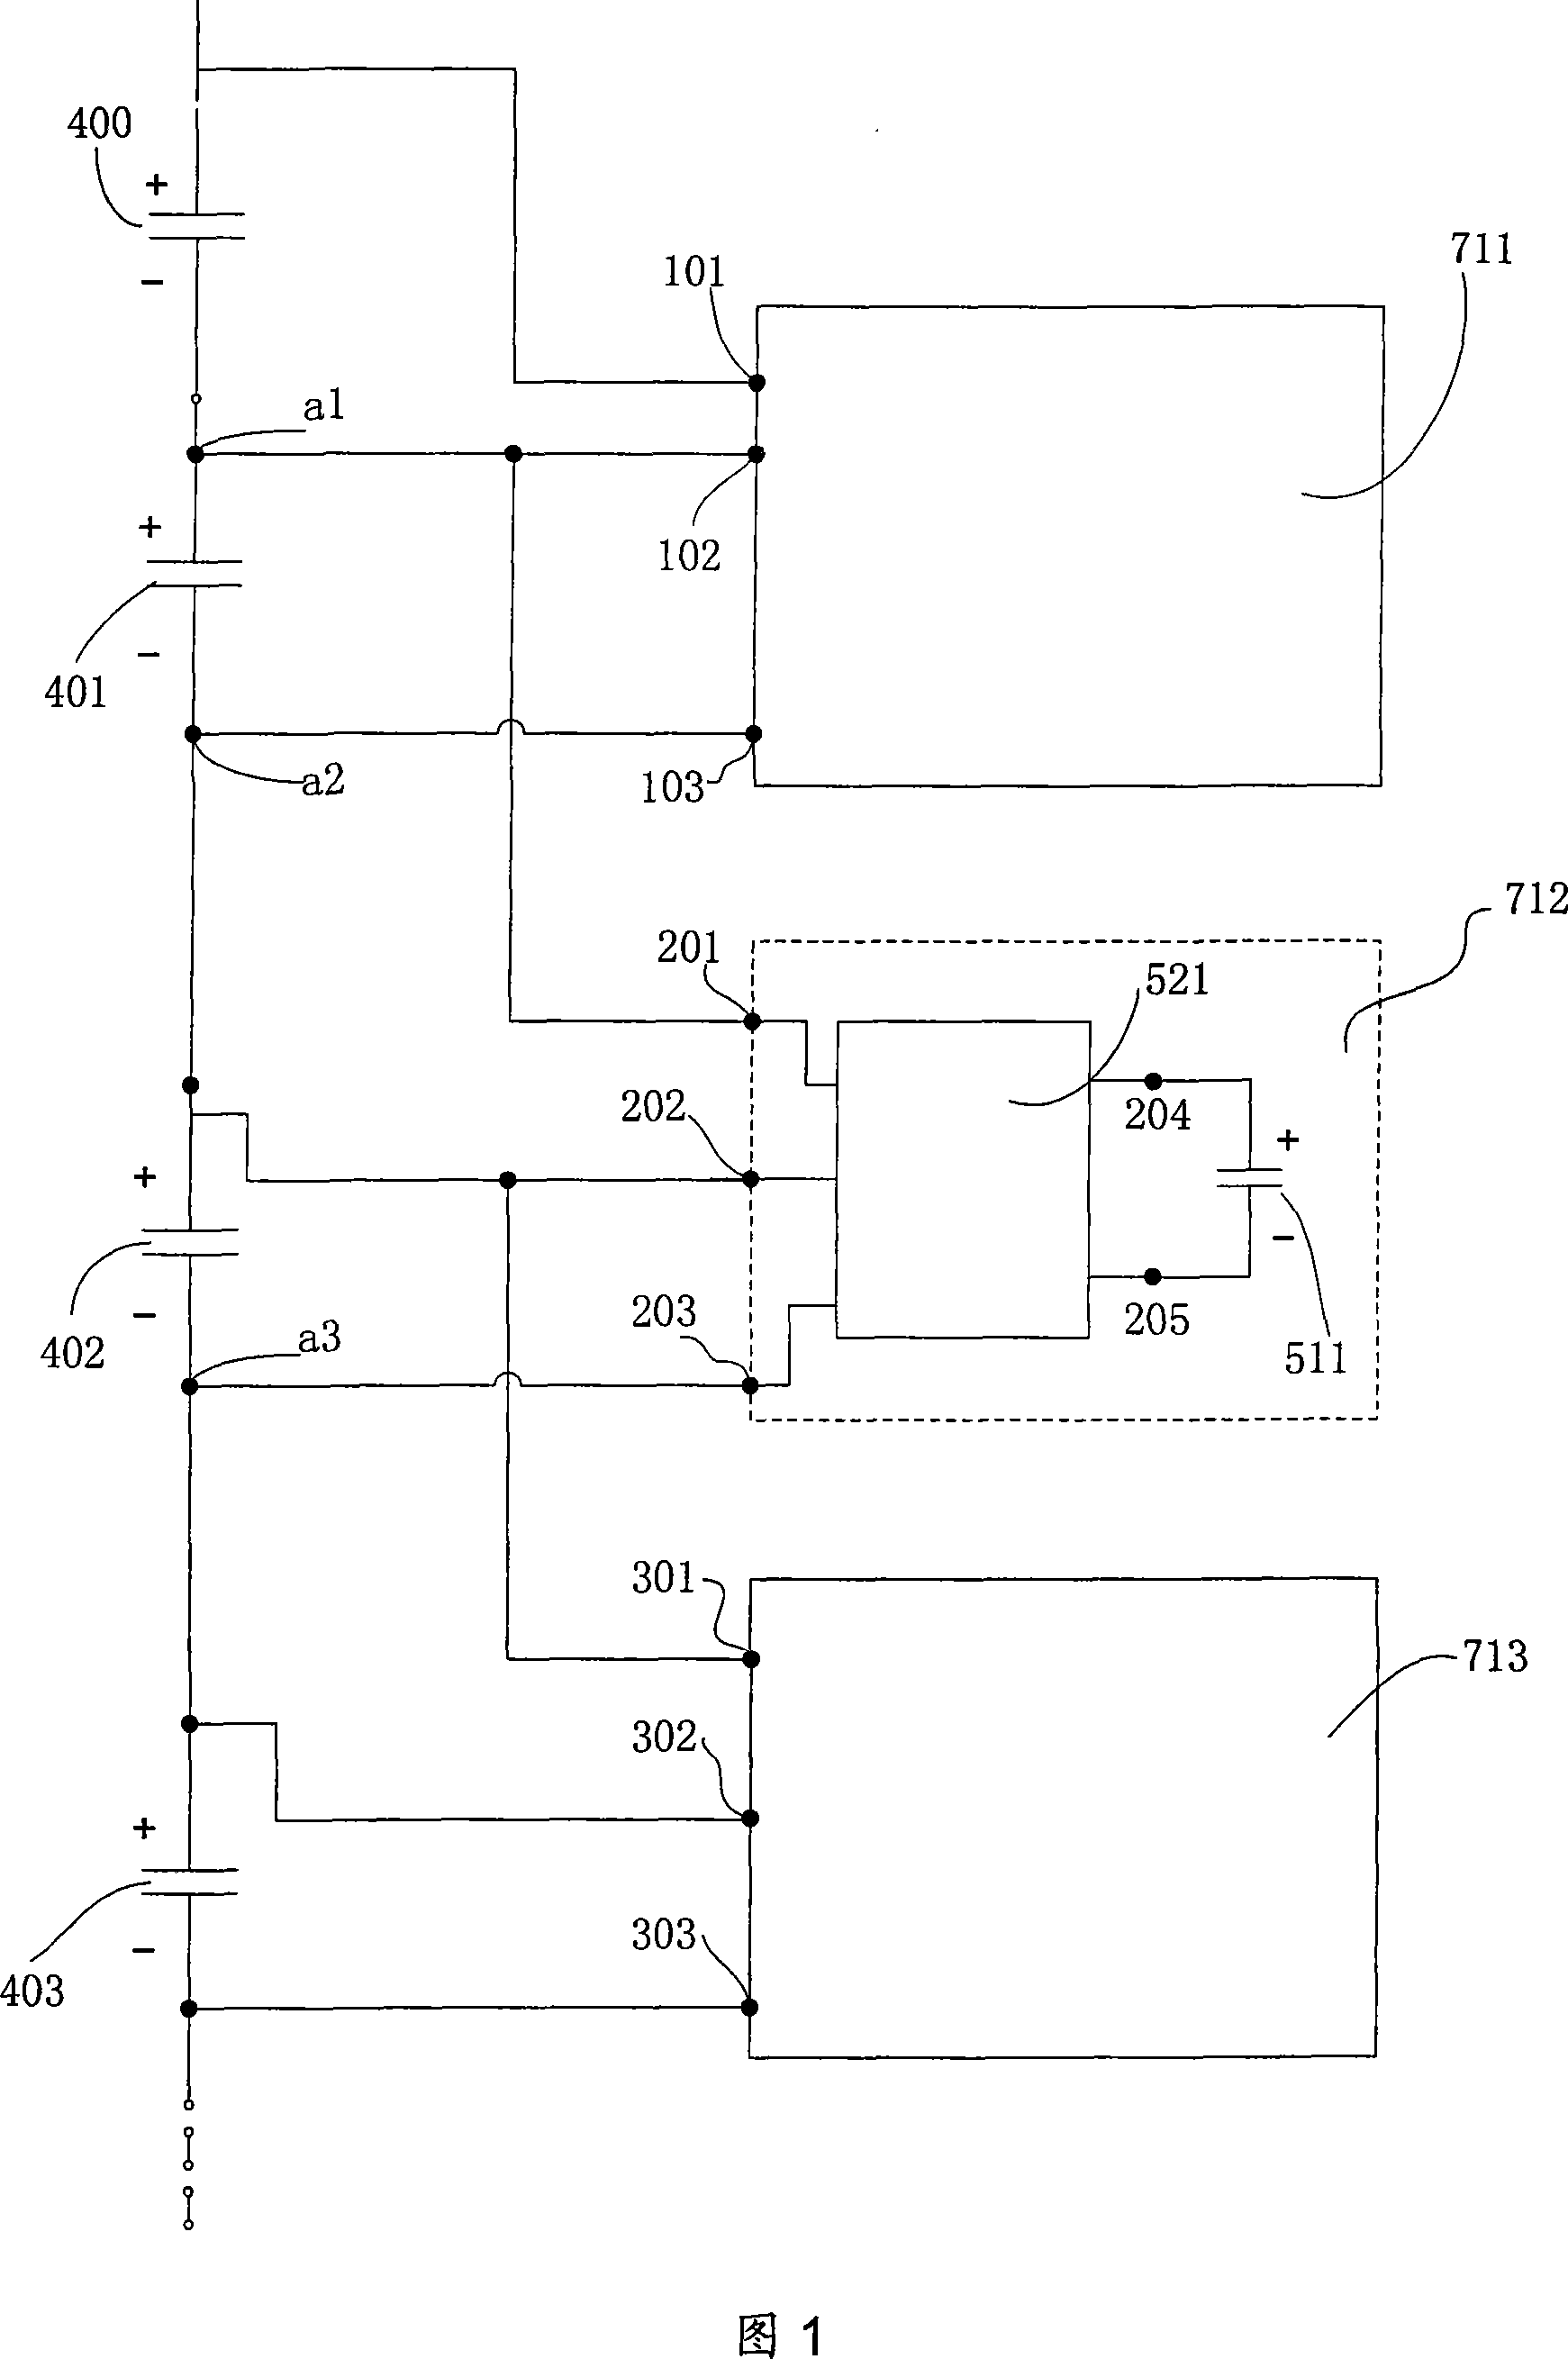 A voltage balance circuit for serial connected super capacitor